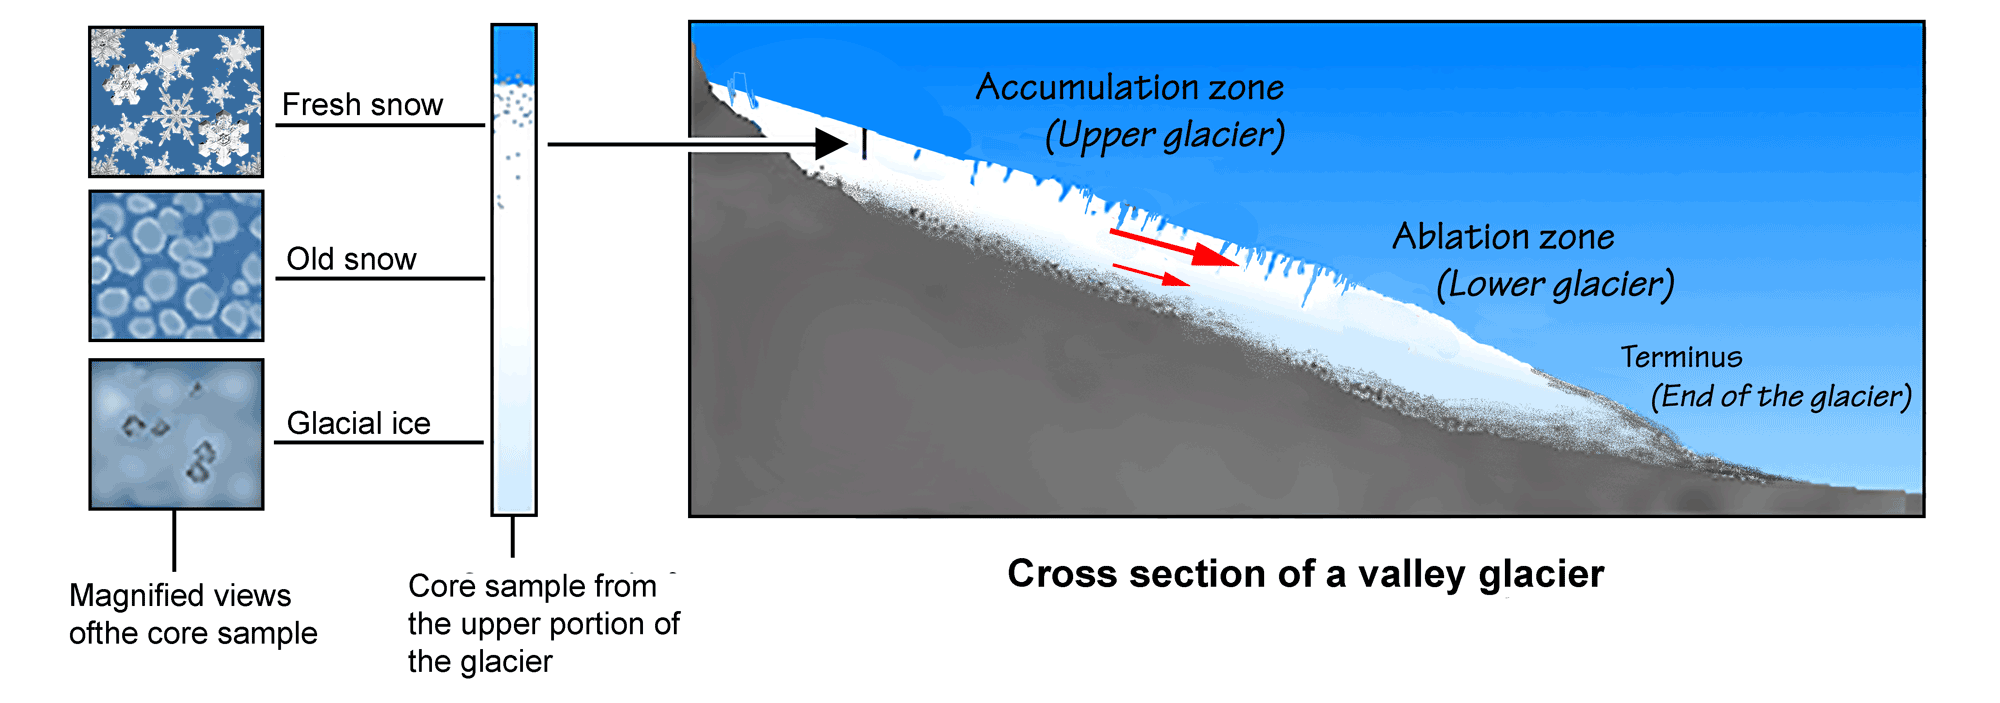 Image showing a cross section of a glacier with different parts labeled.